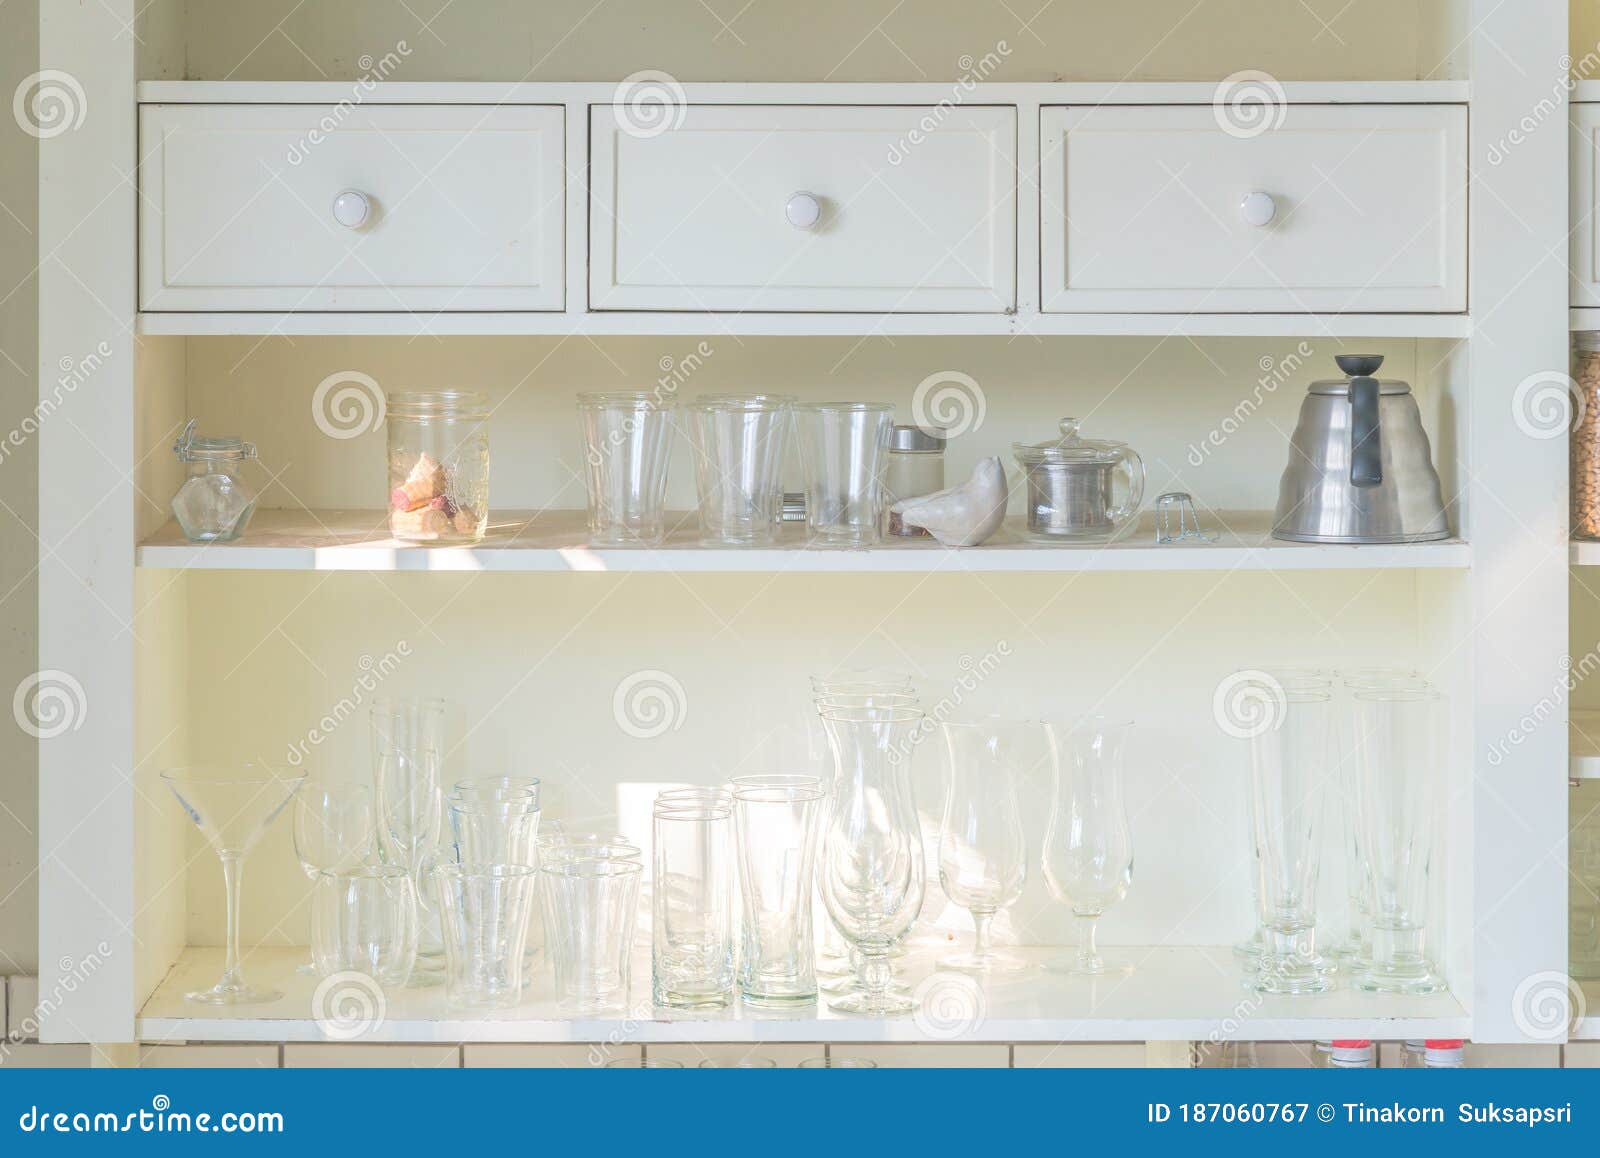 Kitchen White Wooden Cabinet Storage With Glass On Shelf Interior For Home And Residence Or Coffee Shop And Restaurant Retro Stock Image Image Of Cupboard